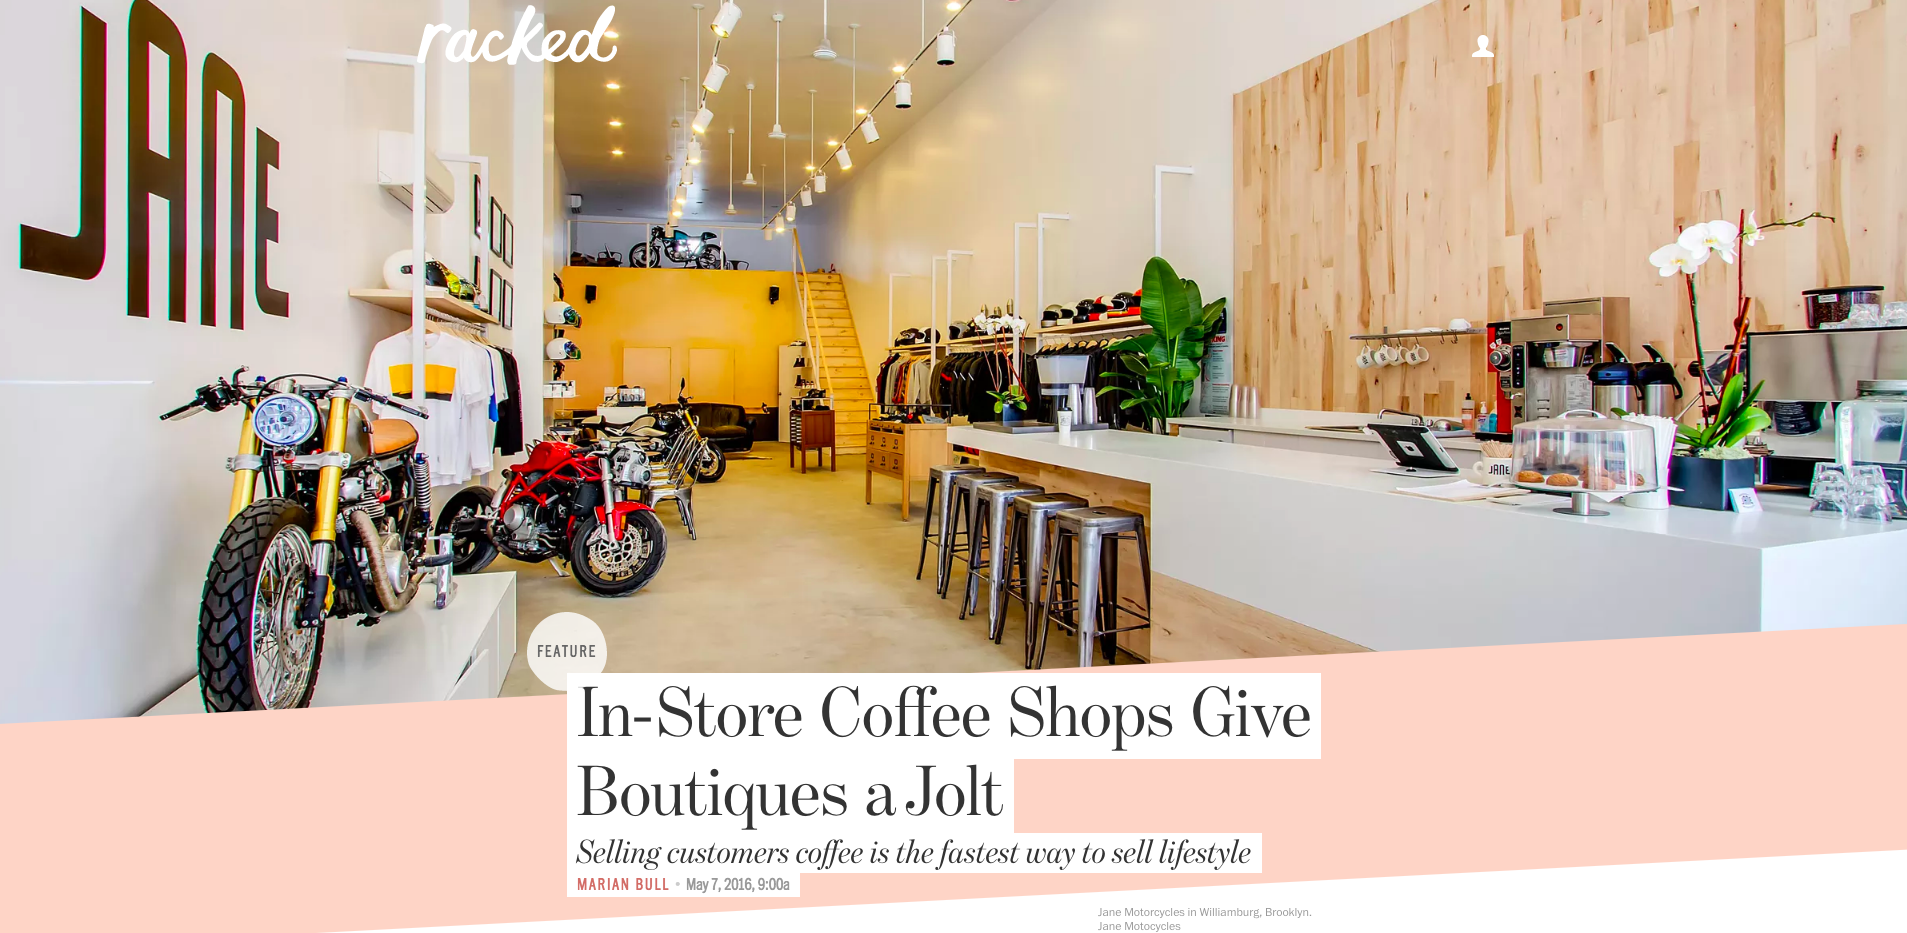 Racked.com feature on JANE and in-store coffee shops